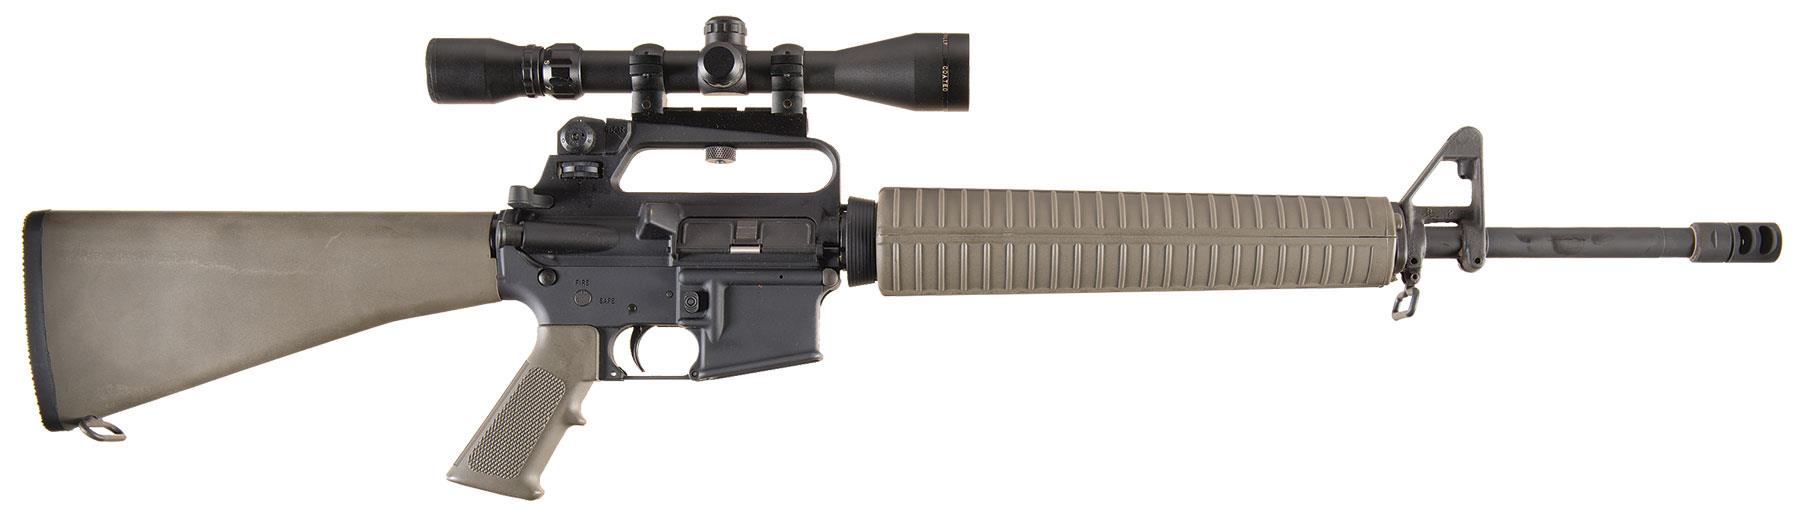 Semi-Automatic Carbine with ScopeIntroduced in 1995, this rifle features a fixed...